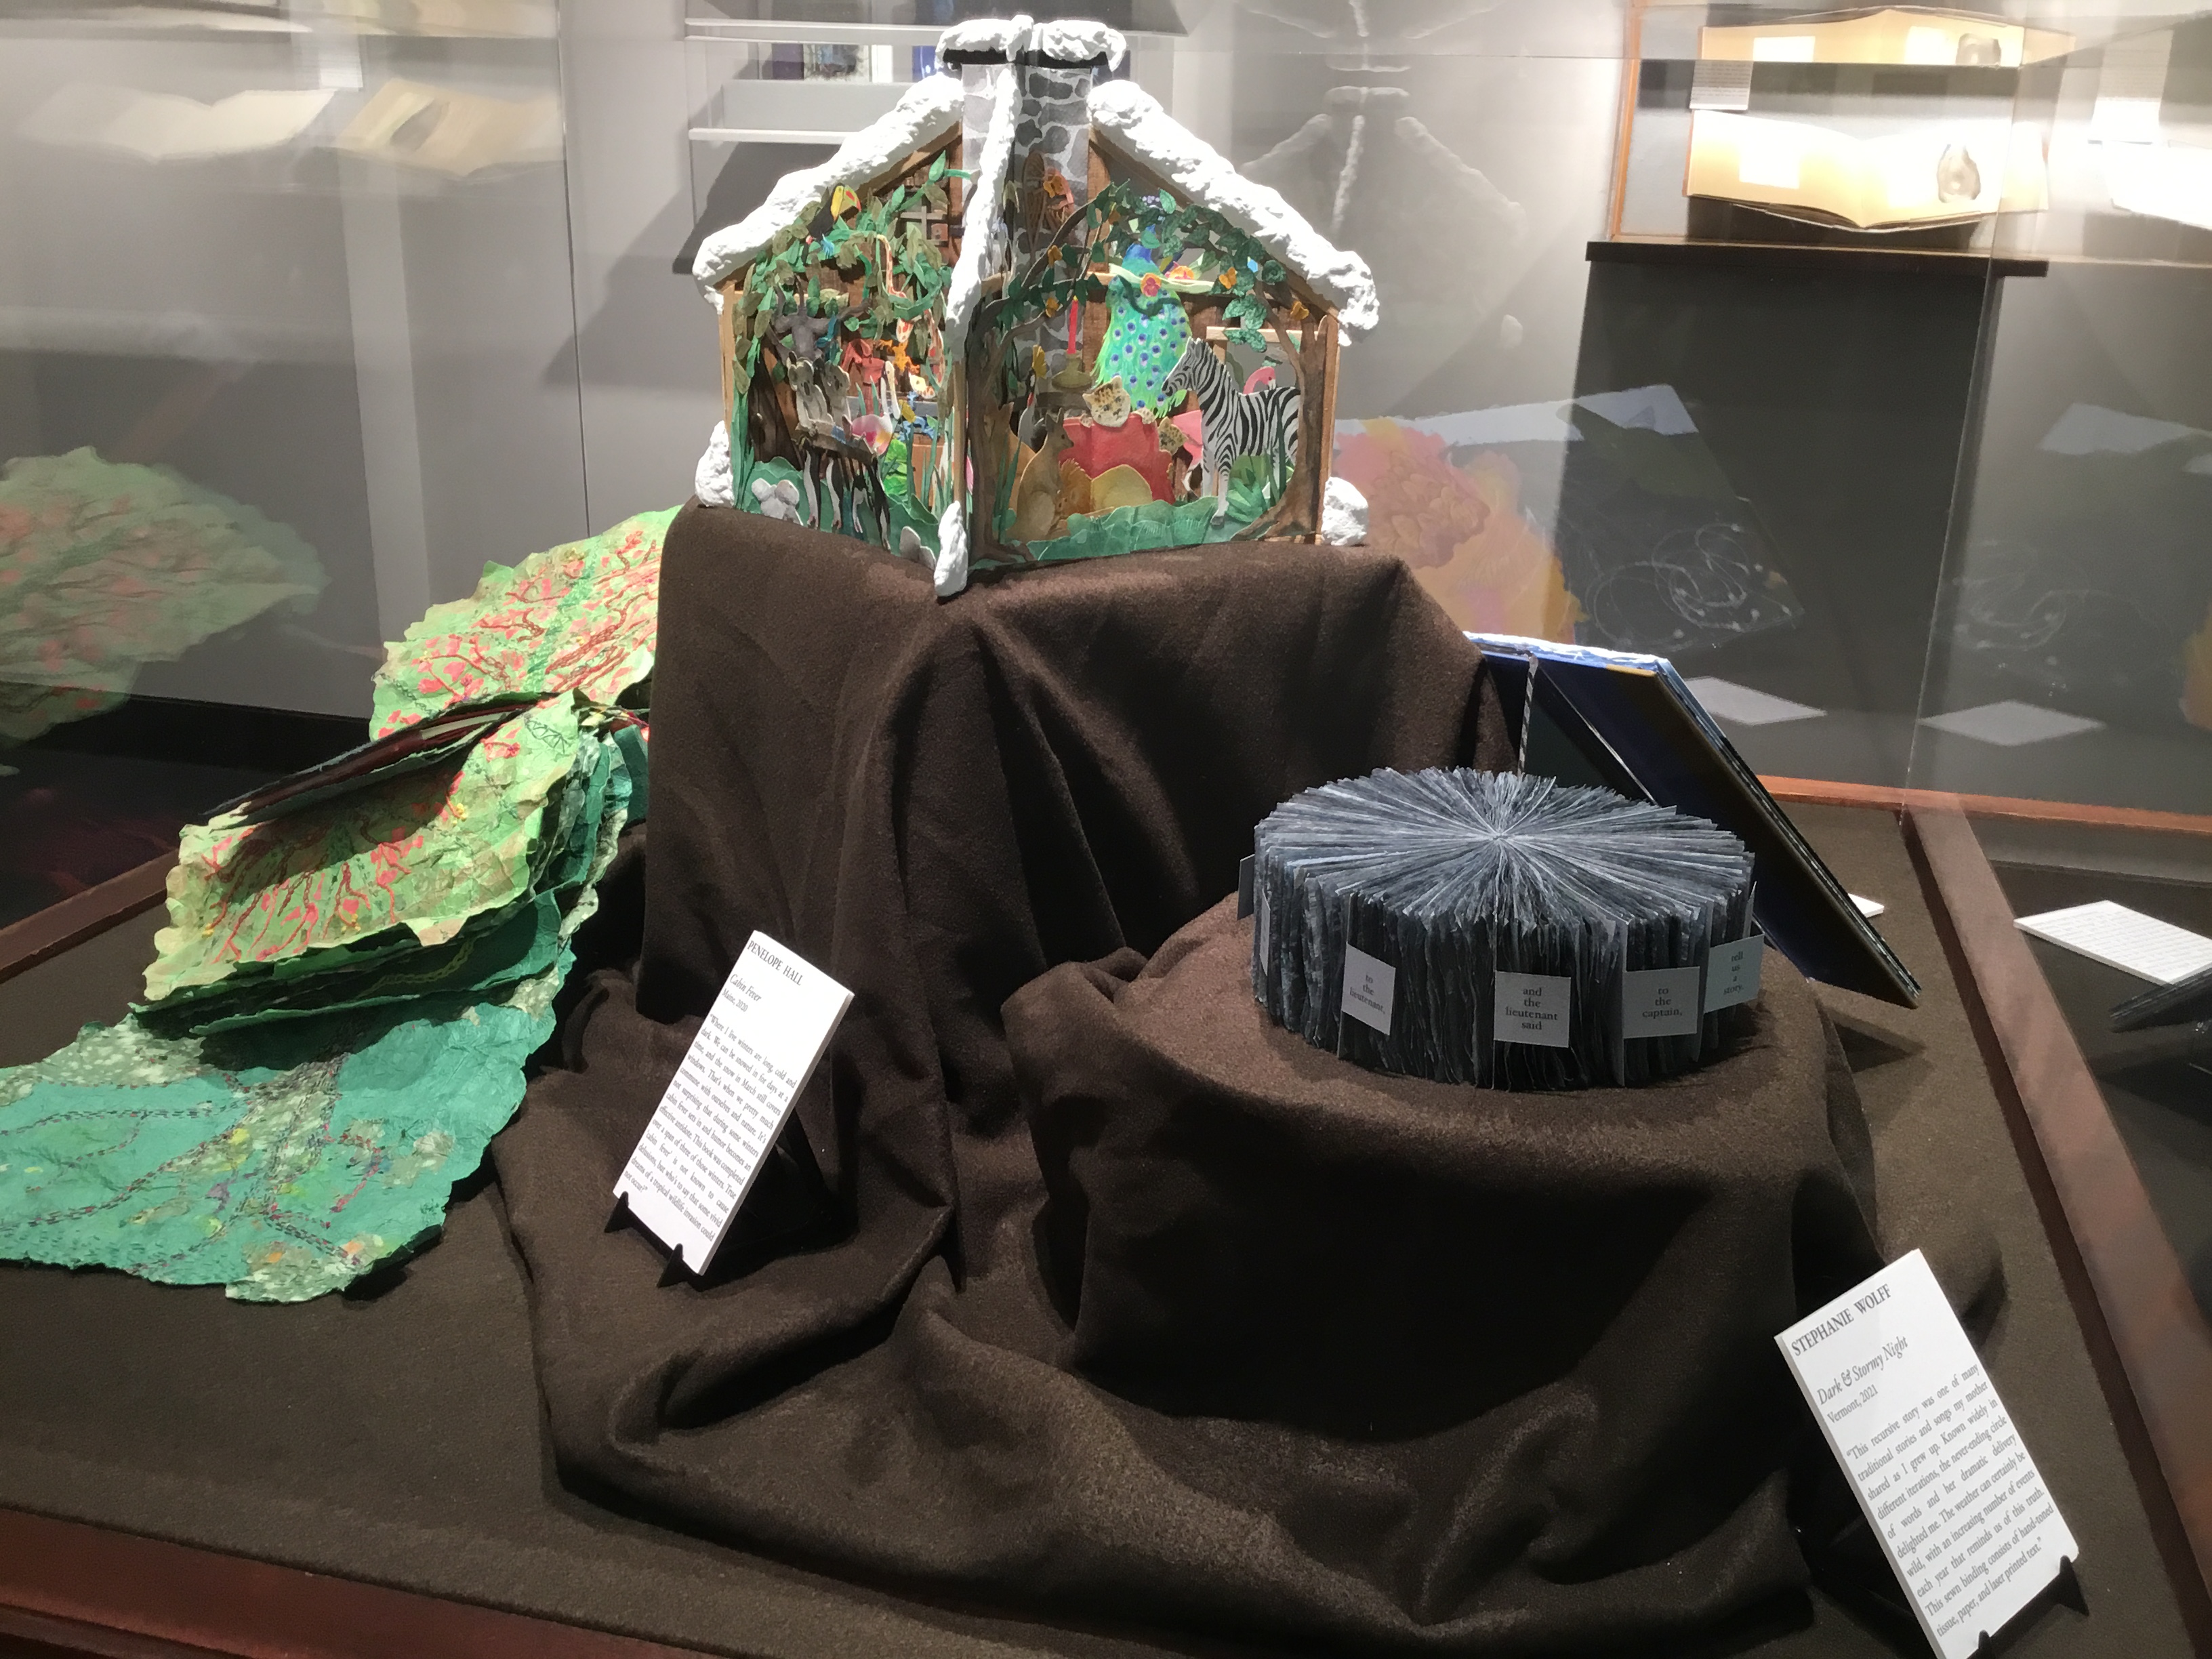 A plexiglass floor case in the small gallery displaying several books. On the left is a salad-like book of leafy green paper pages embroidered with veins and flopping out beside an interior pages bound together by a mass of red threads.  Behind it on a pedestal in the middle stands a pop-up carousel book depicting colorful tropical animals bound together in a paper cabin topped with snow.  The right foreground pedestal displays a blueish gray book that forms a cylindrical shape bound at the center.